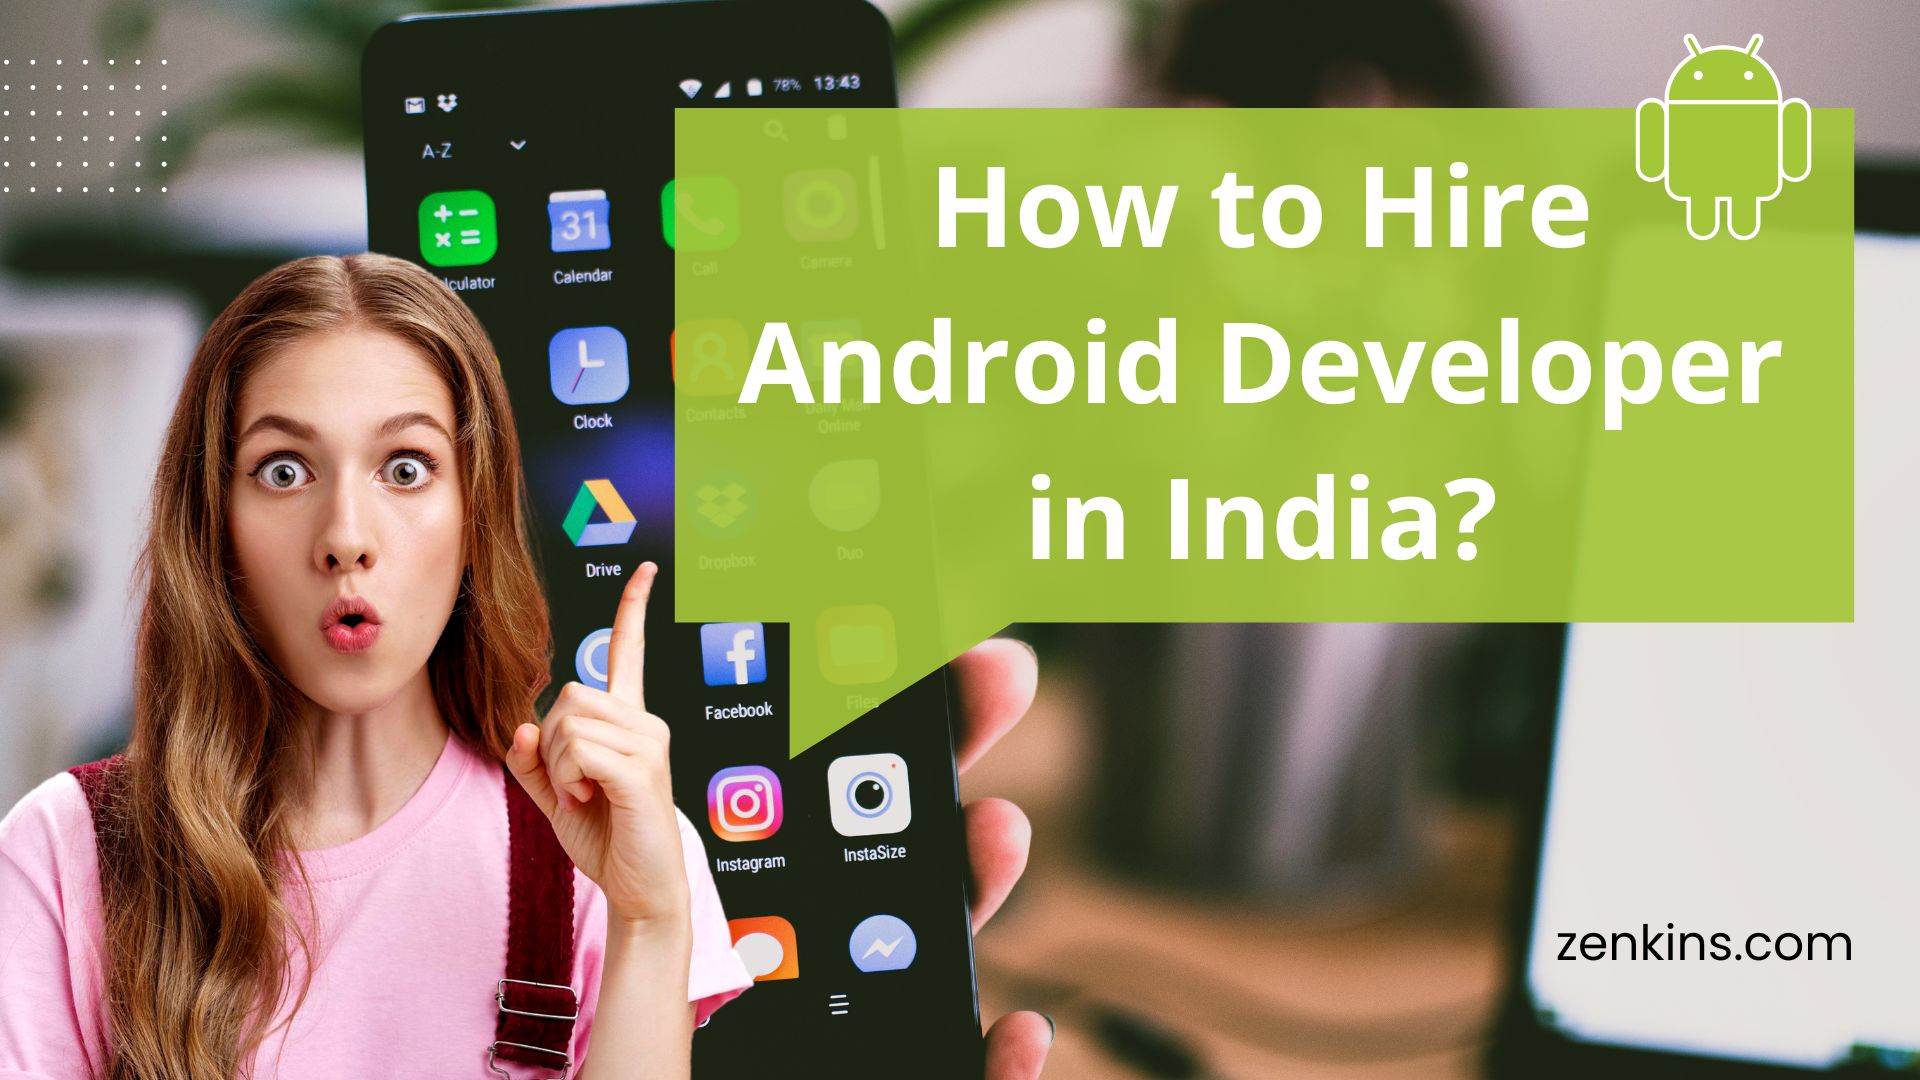 Hire Android Developer in India